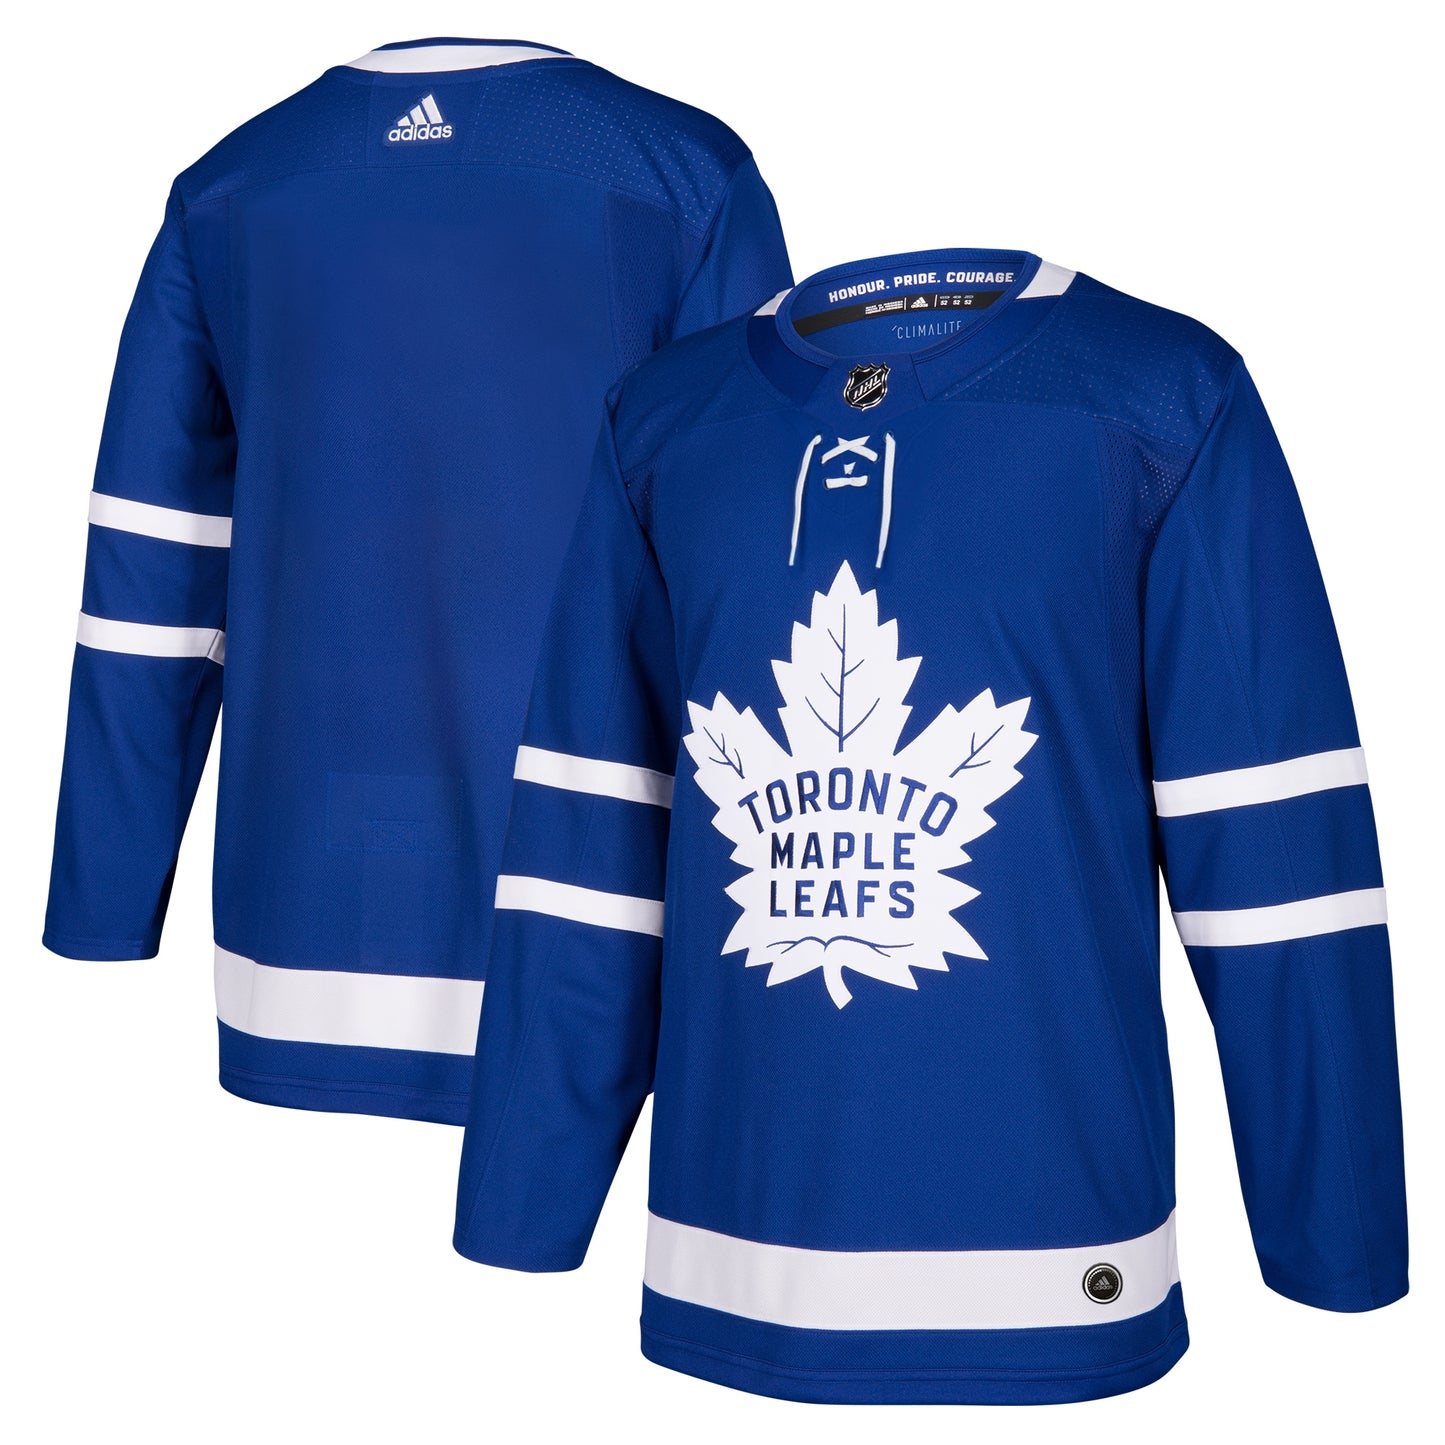 Toronto Maple Leafs adidas Home Authentic Blank Jersey - Blue